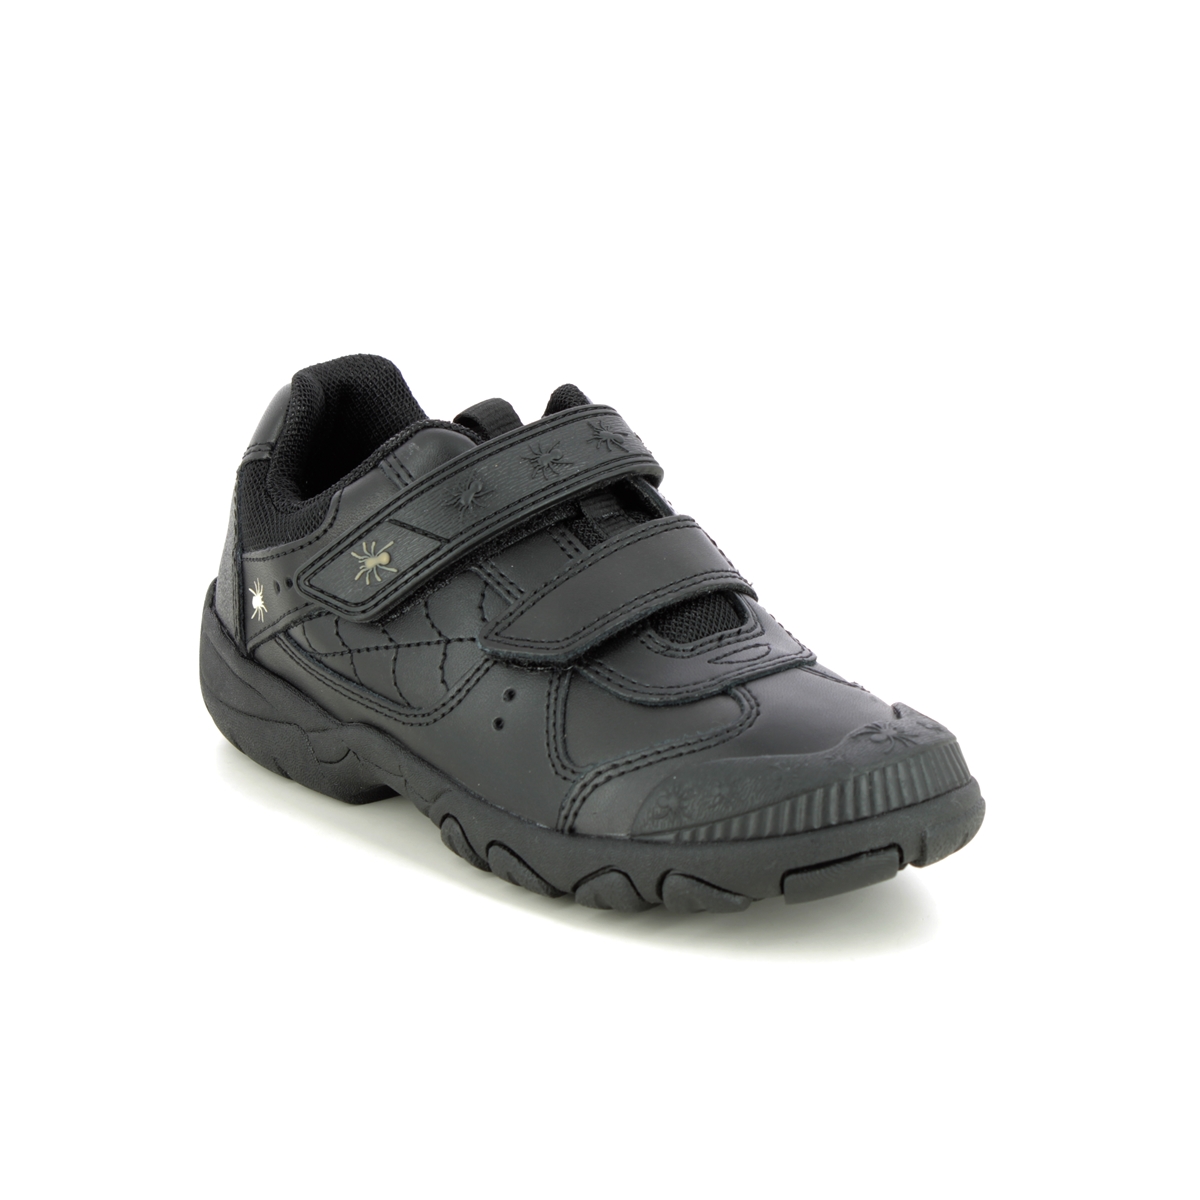 Start Rite - Tarantula In Black Leather 2272-76F In Size 13.5 In Plain Black Leather For School Boys Shoes  In Black Leather For kids